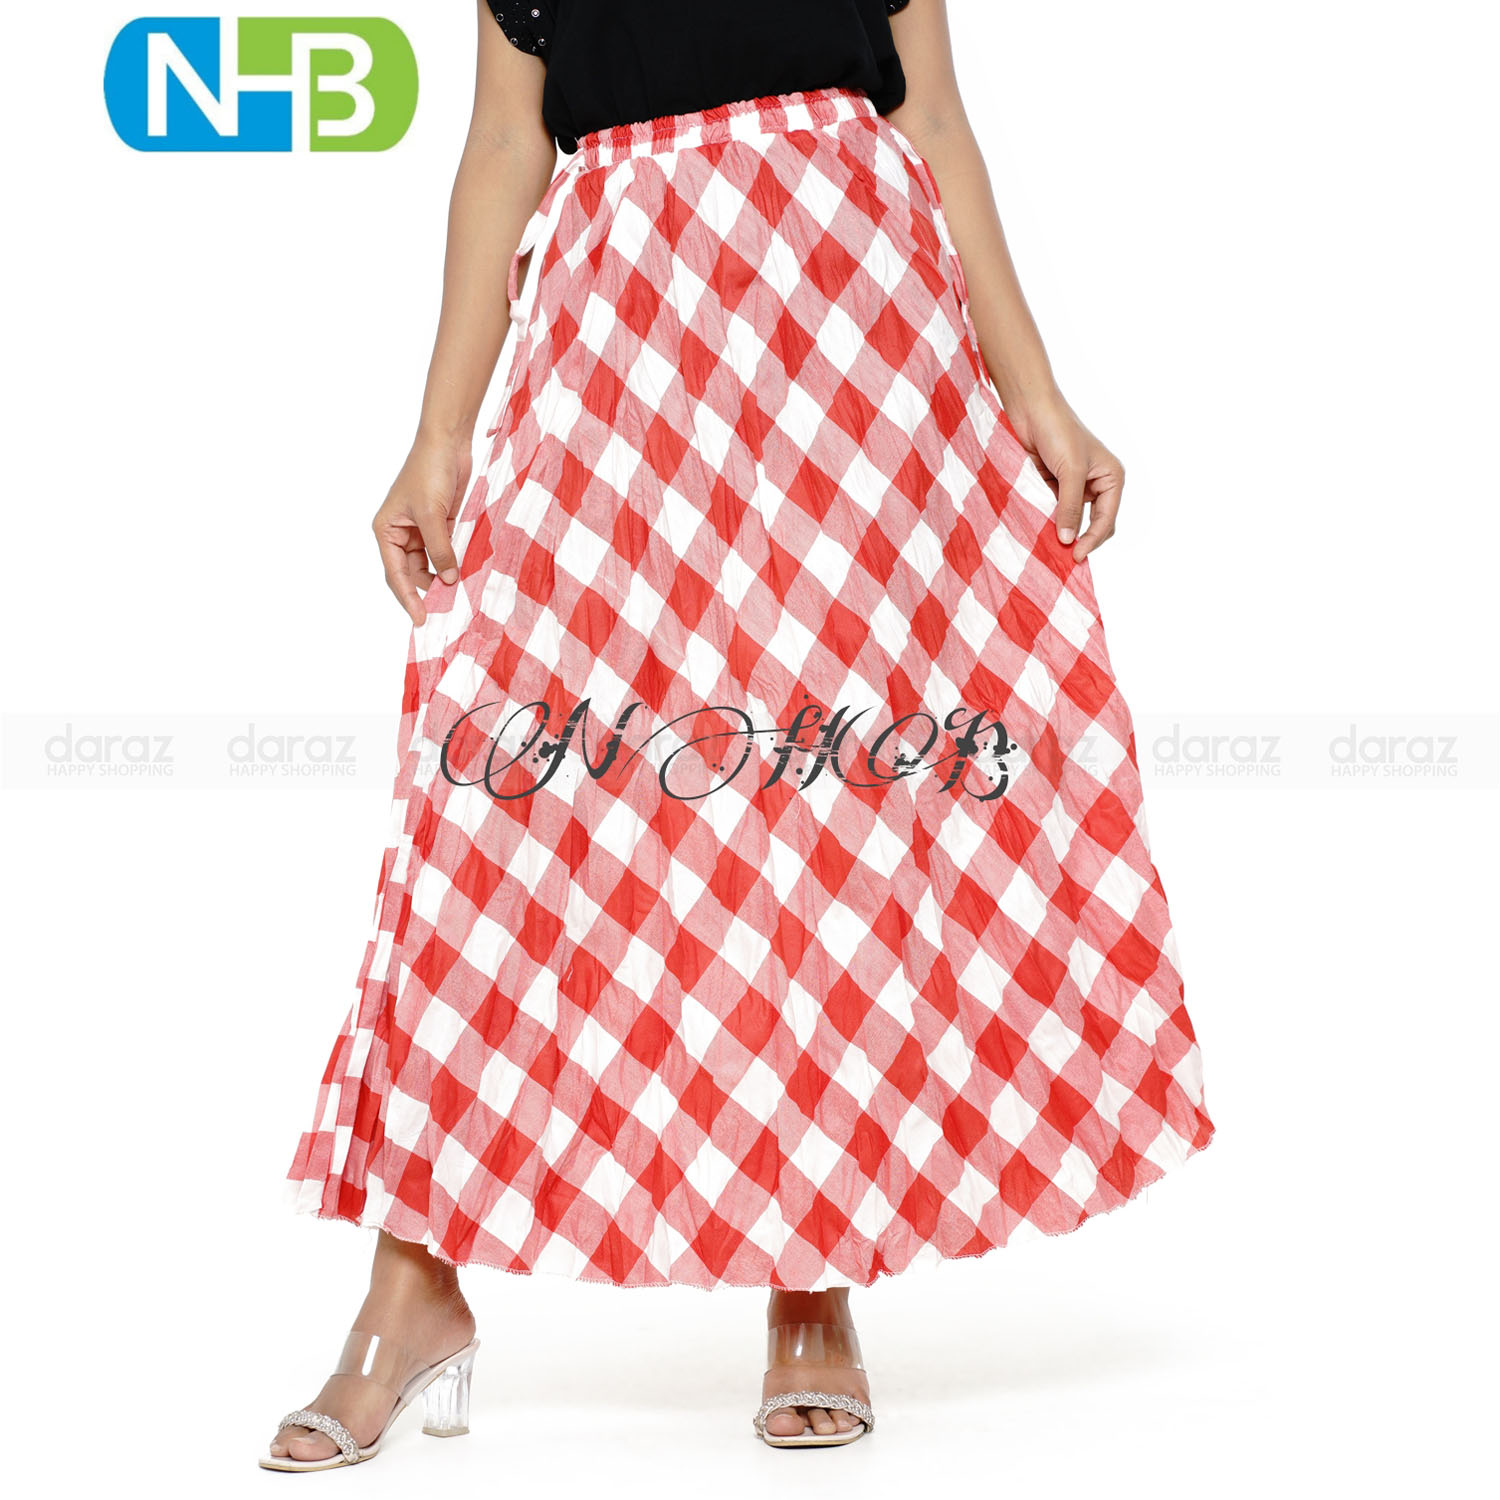 Stylish And Fashionable Long Skirt For Women